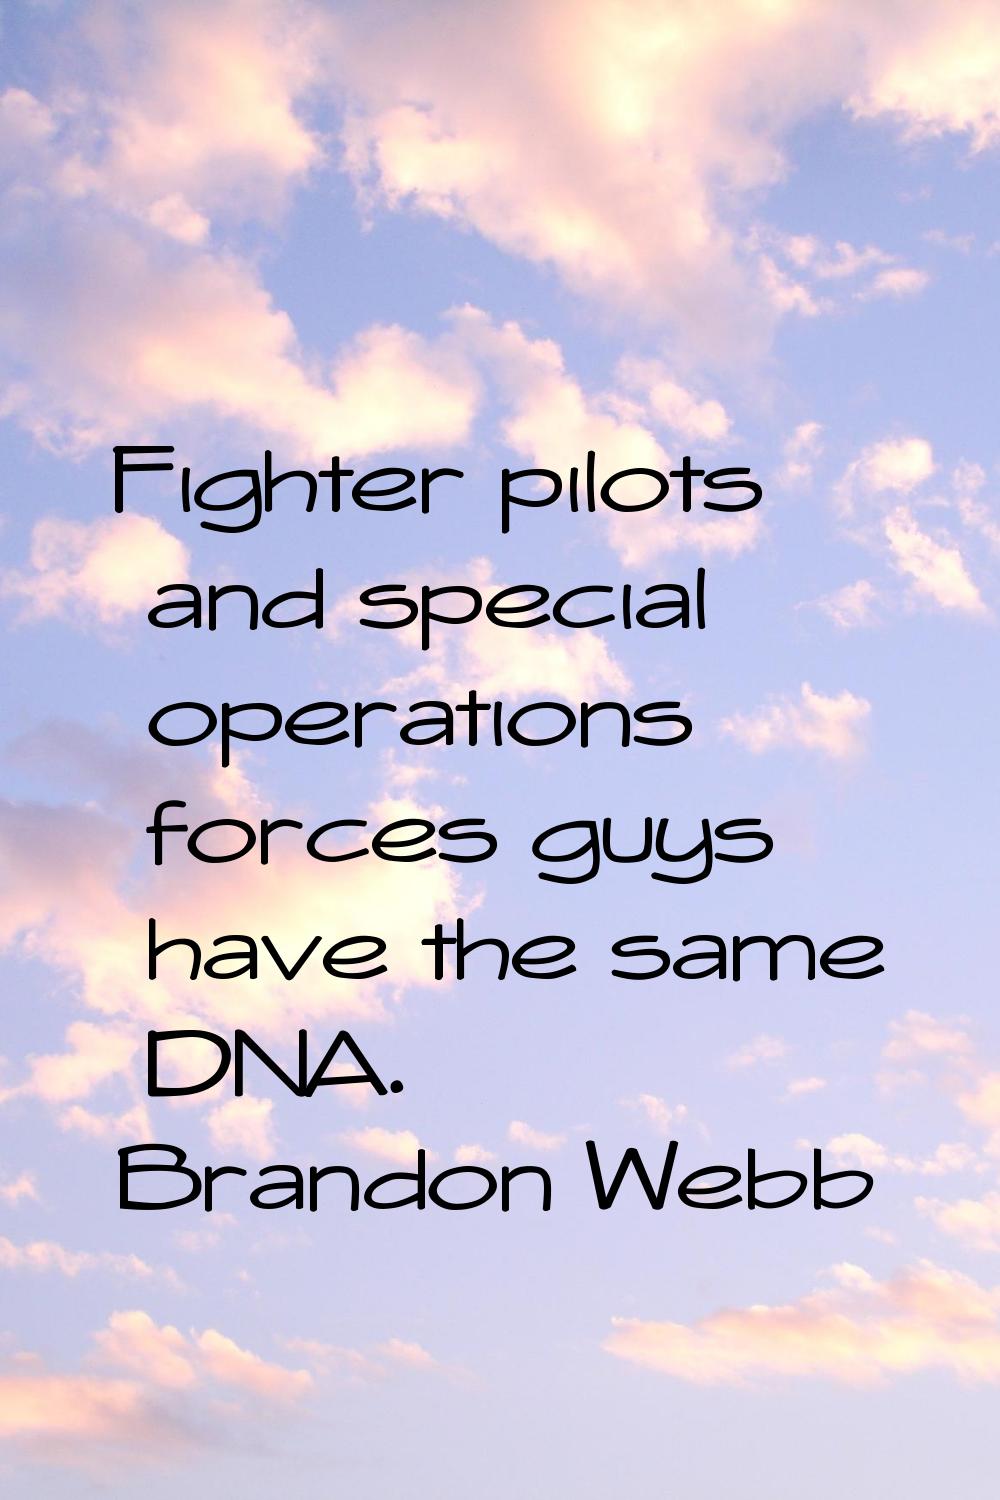 Fighter pilots and special operations forces guys have the same DNA.